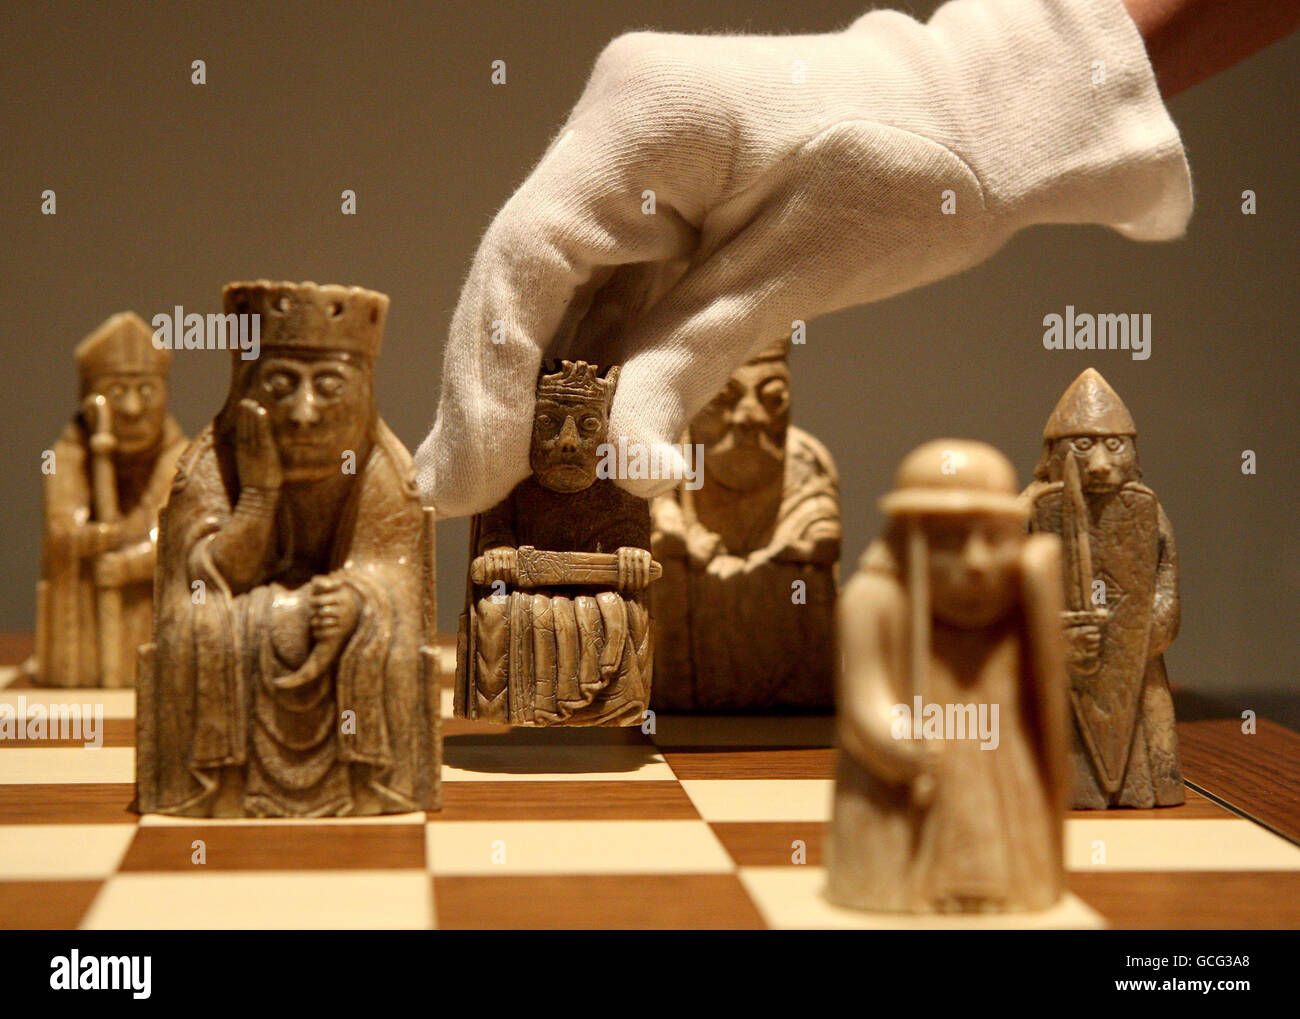 British Museum: Lewis Chess Pieces, My first Flickr photo! …